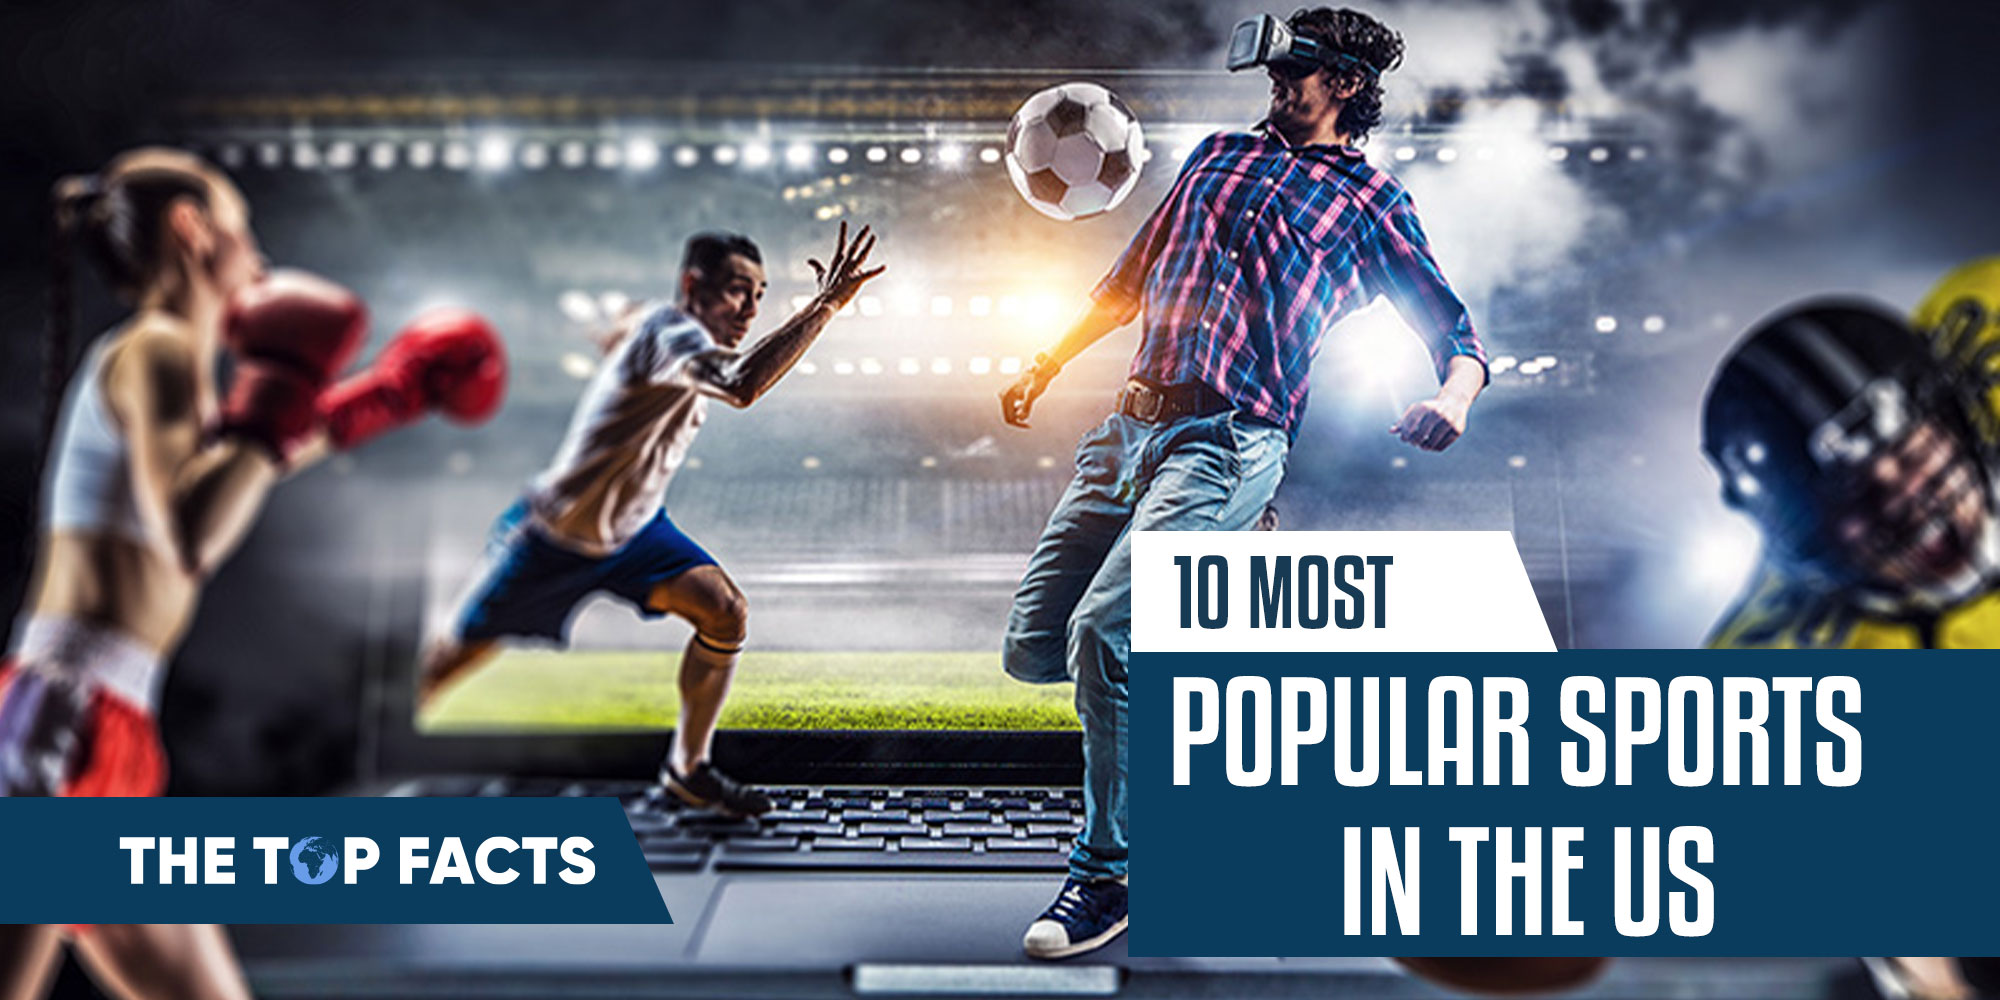 10 Most Popular Sports in the US